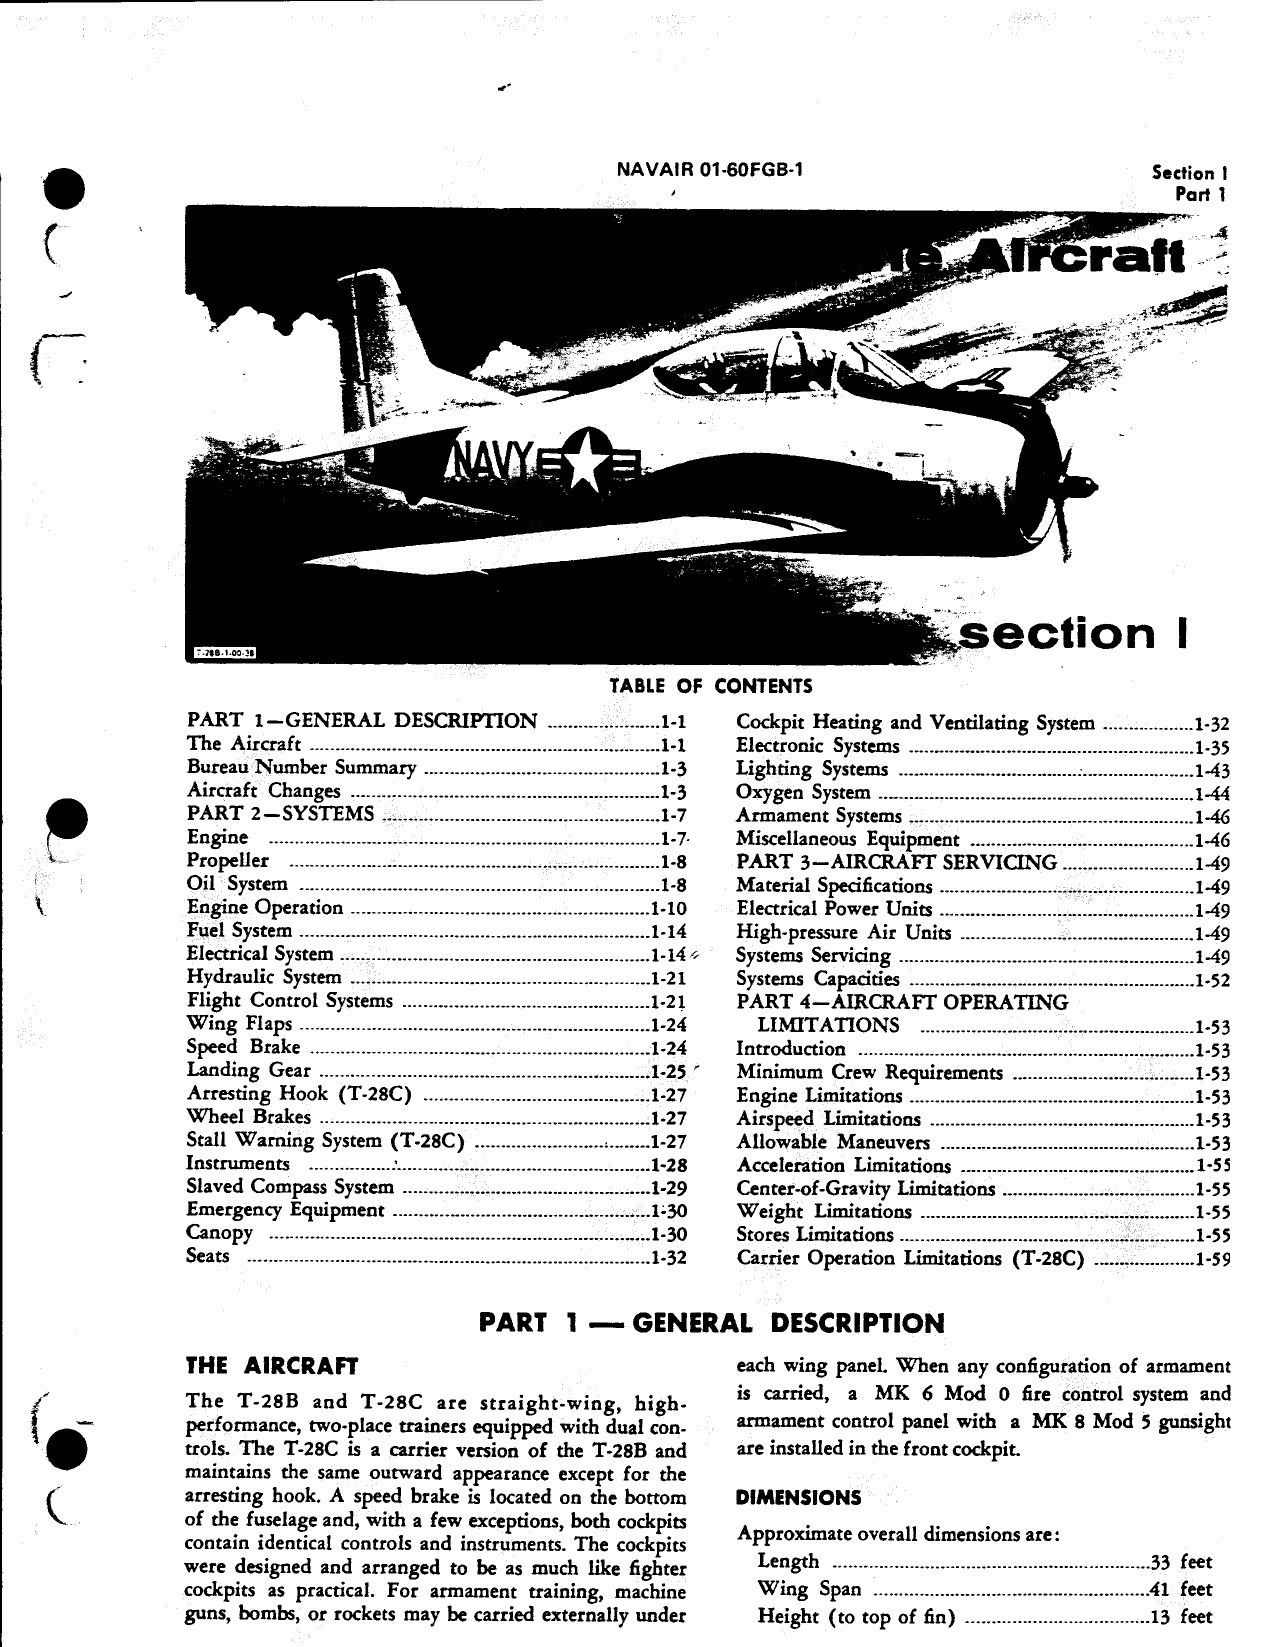 Sample page 2 from AirCorps Library document: Natops Flight Manual - T-28B T-28C